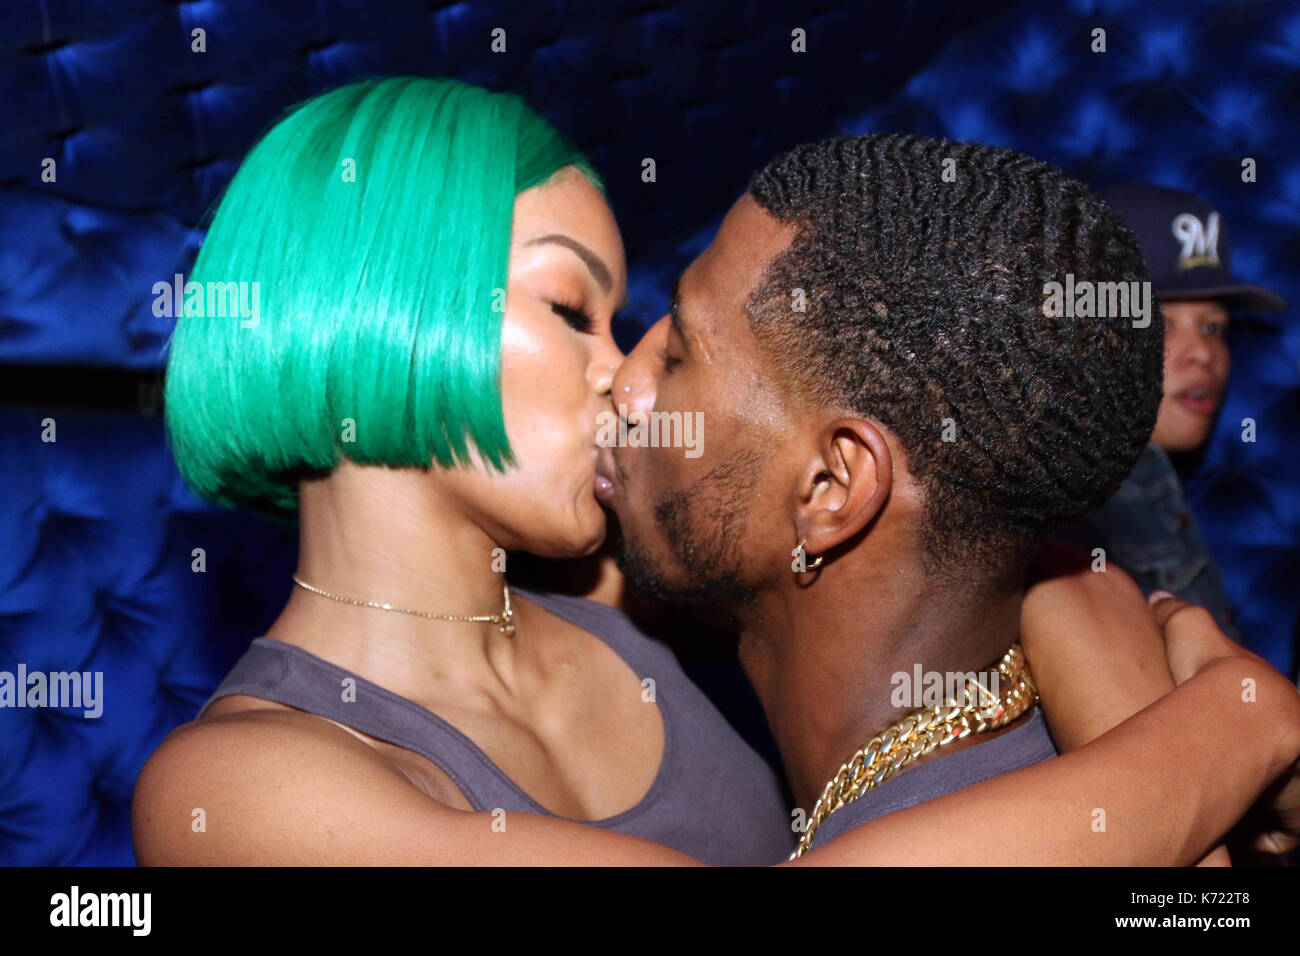 New York, NY, USA. 13th Sep, 2017. Teyana Taylor and Iman Shumpert at Galore and Juicy Couture's NYFW Ball at Public Arts in New York City on September 13, 2017. Credit: Walik Goshorn/Media Punch/Alamy Live News Stock Photo